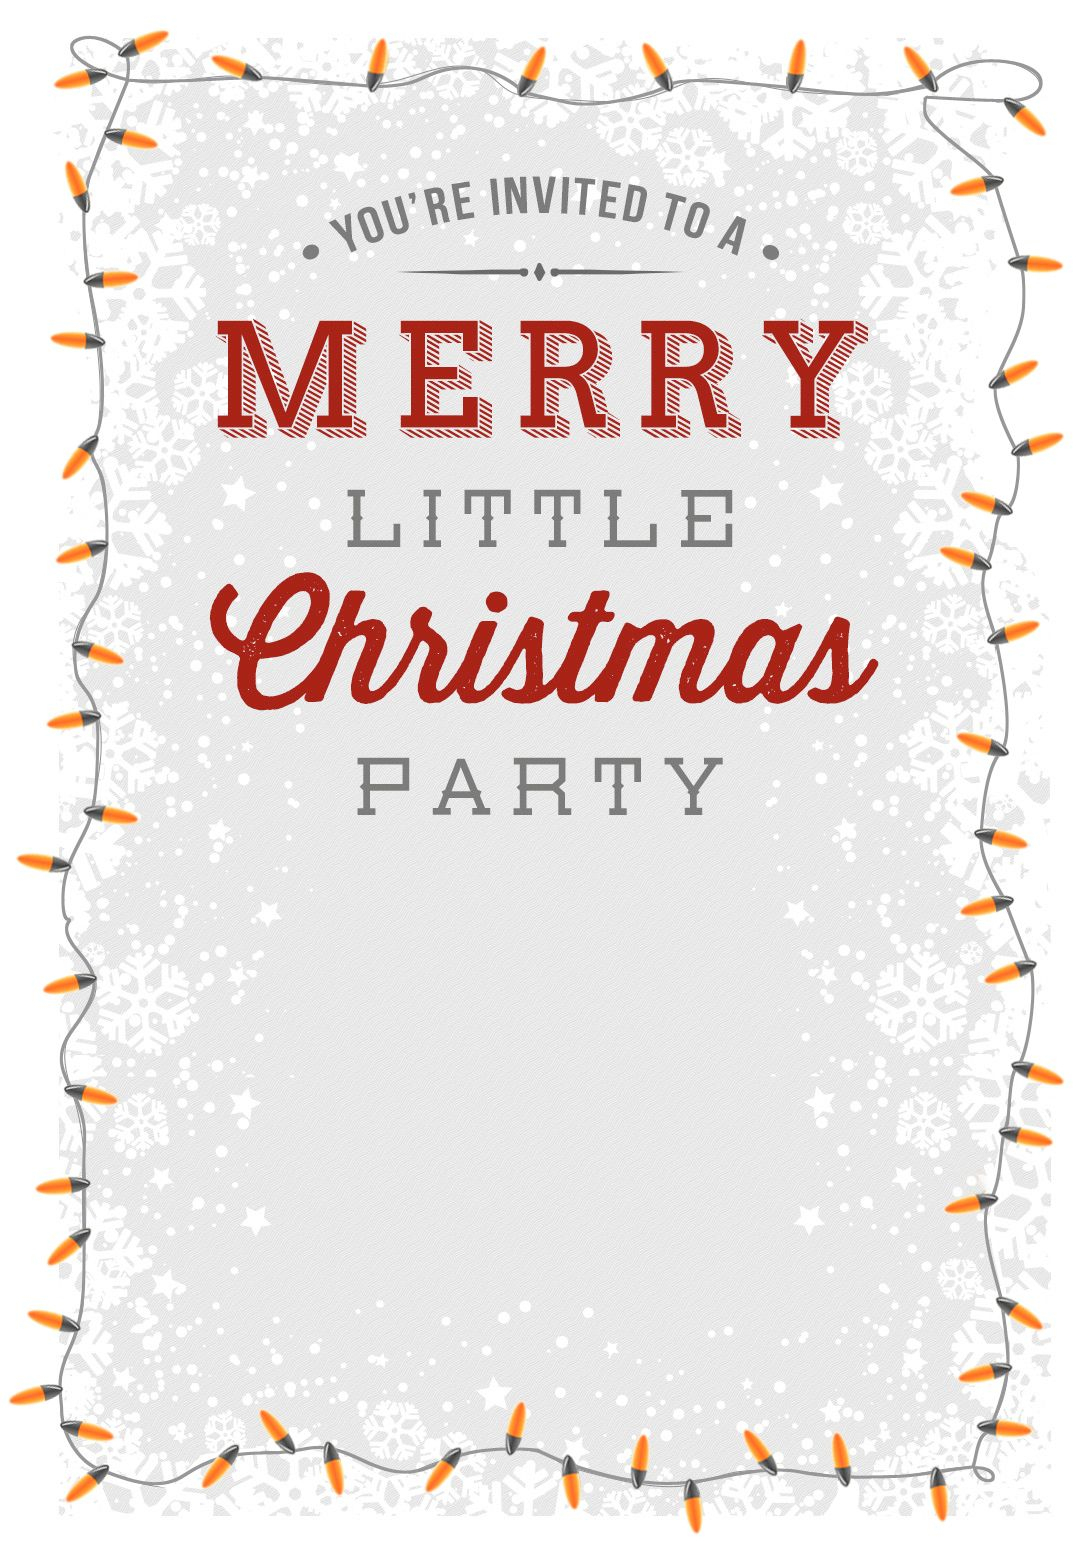 A Merry Little Party - Free Printable Christmas Invitation Template - Free Printable Religious Christmas Invitations